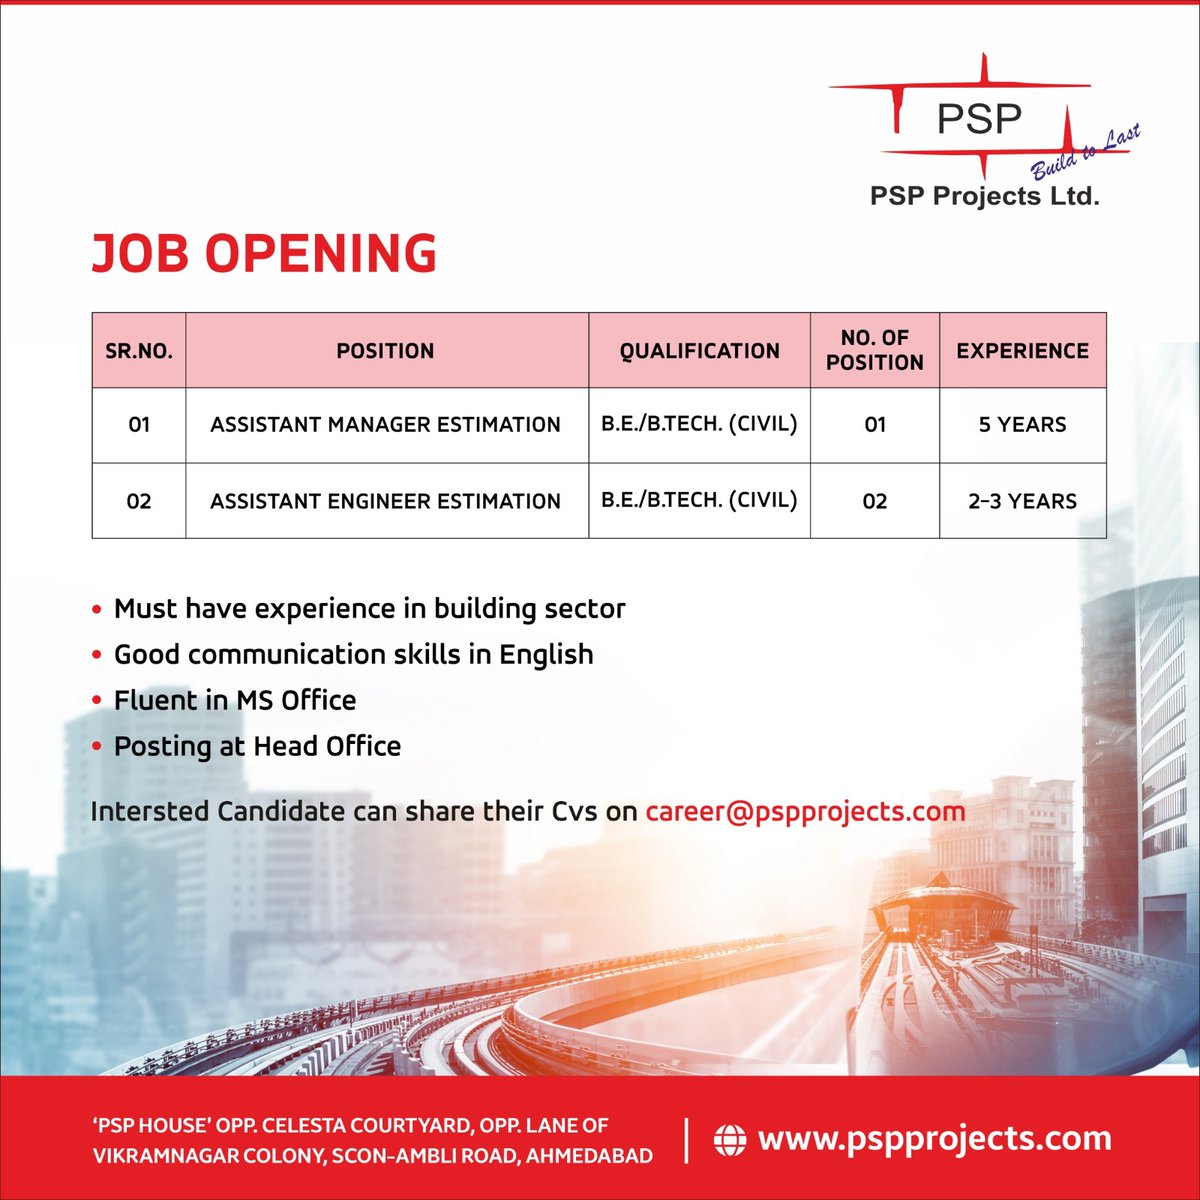 We are hiring for Assistant Manager Estimation & Assistant Engineer Estimation. Grab this opportunity and share your updated CV on email career@pspprojects.com

#hiringalert #assistantmanager #assistantengineer #pspprojects #jobopenings #ahmedabad